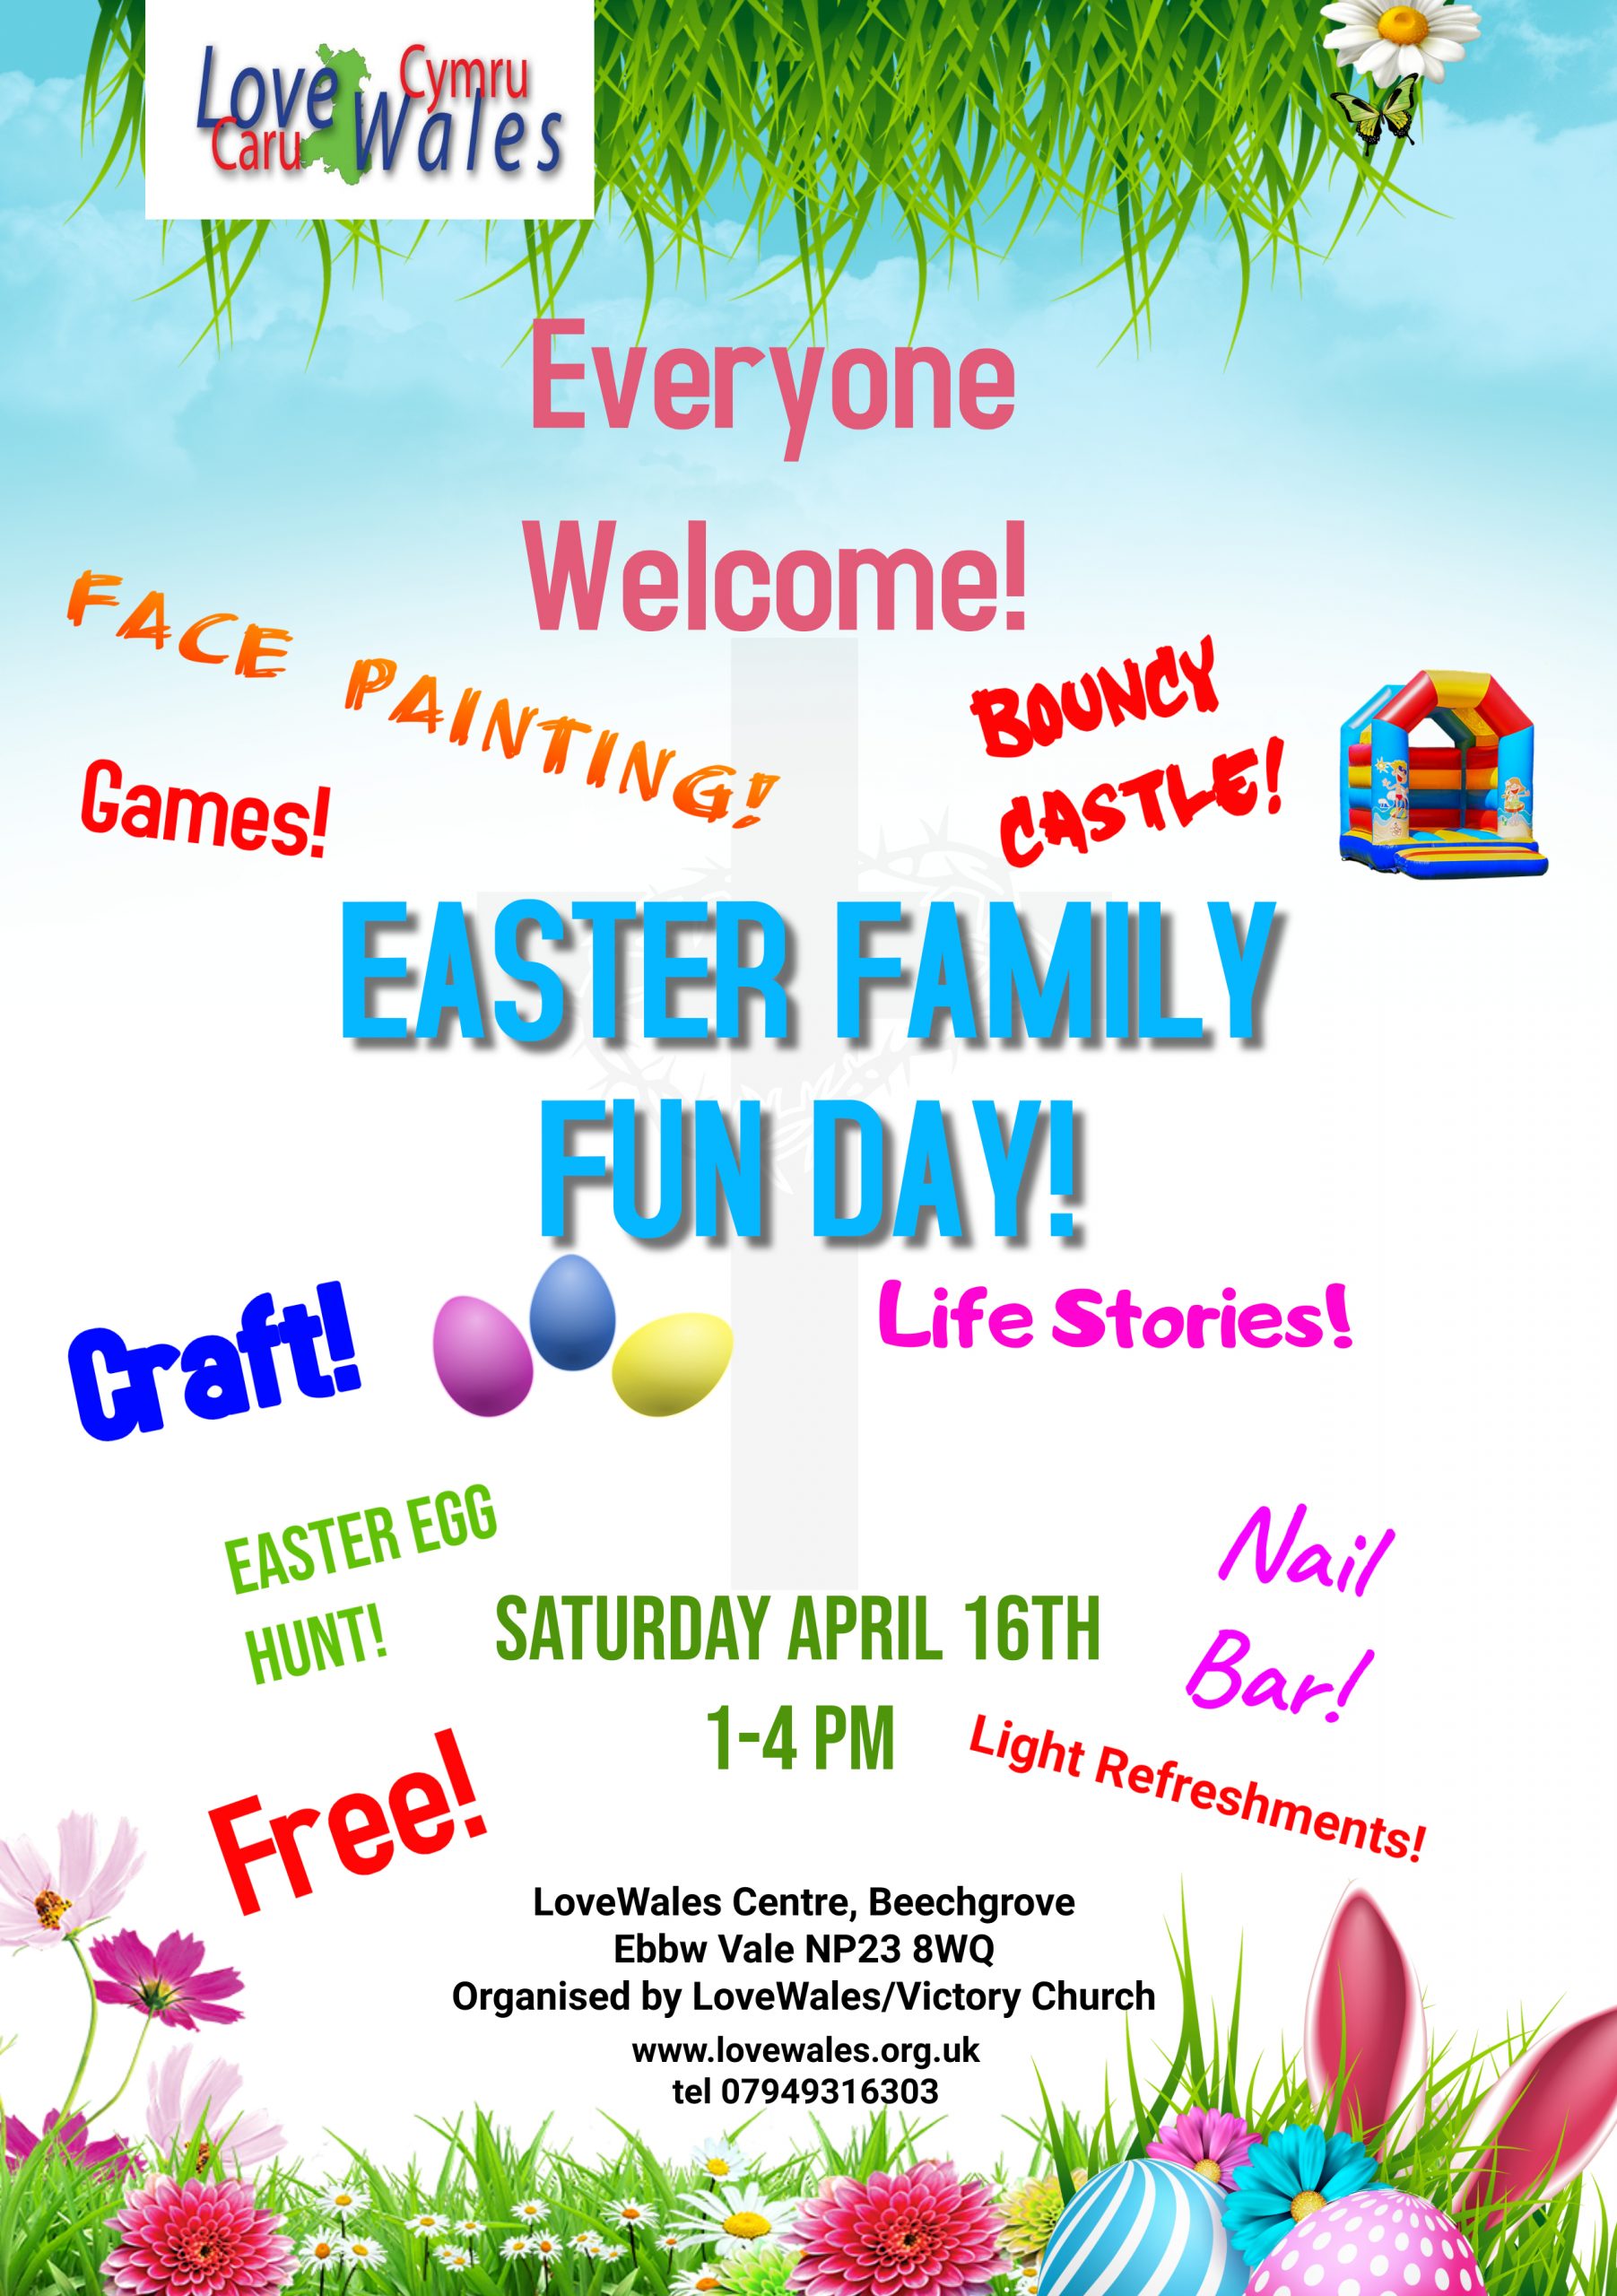 Easter Family Fun Day!